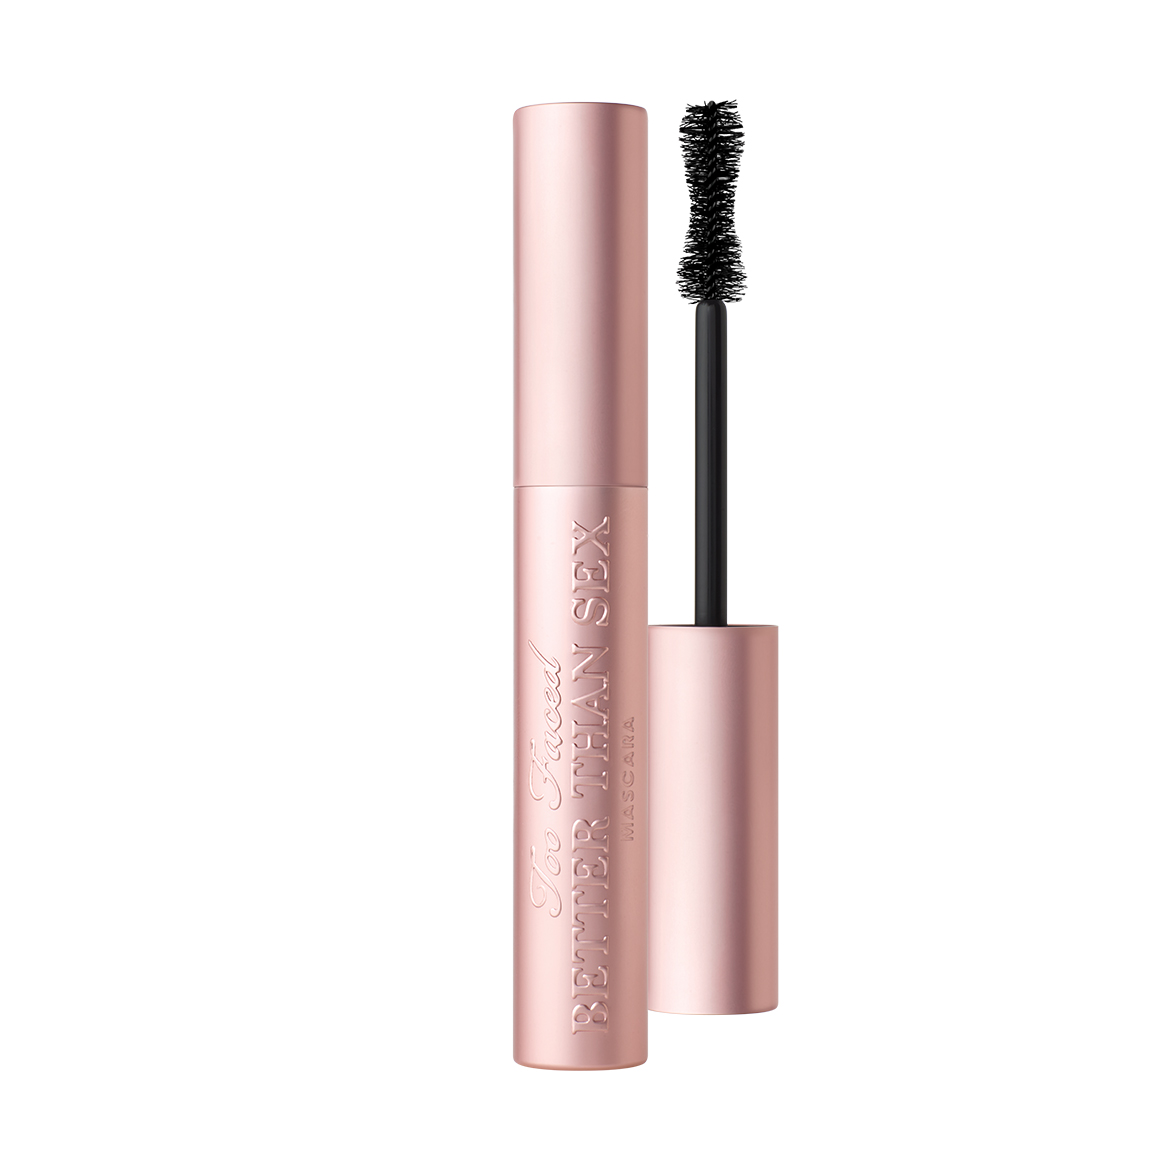 A New Mascara That’s Better Than….What?!